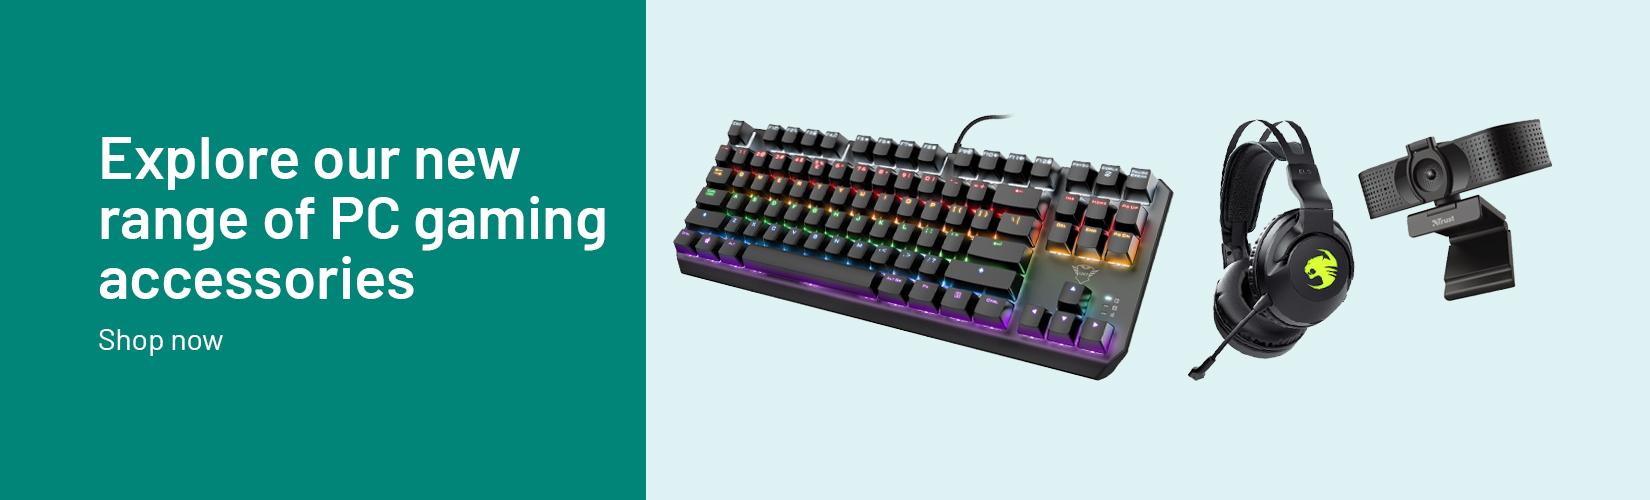 Explore our new range of PC gaming accessories.